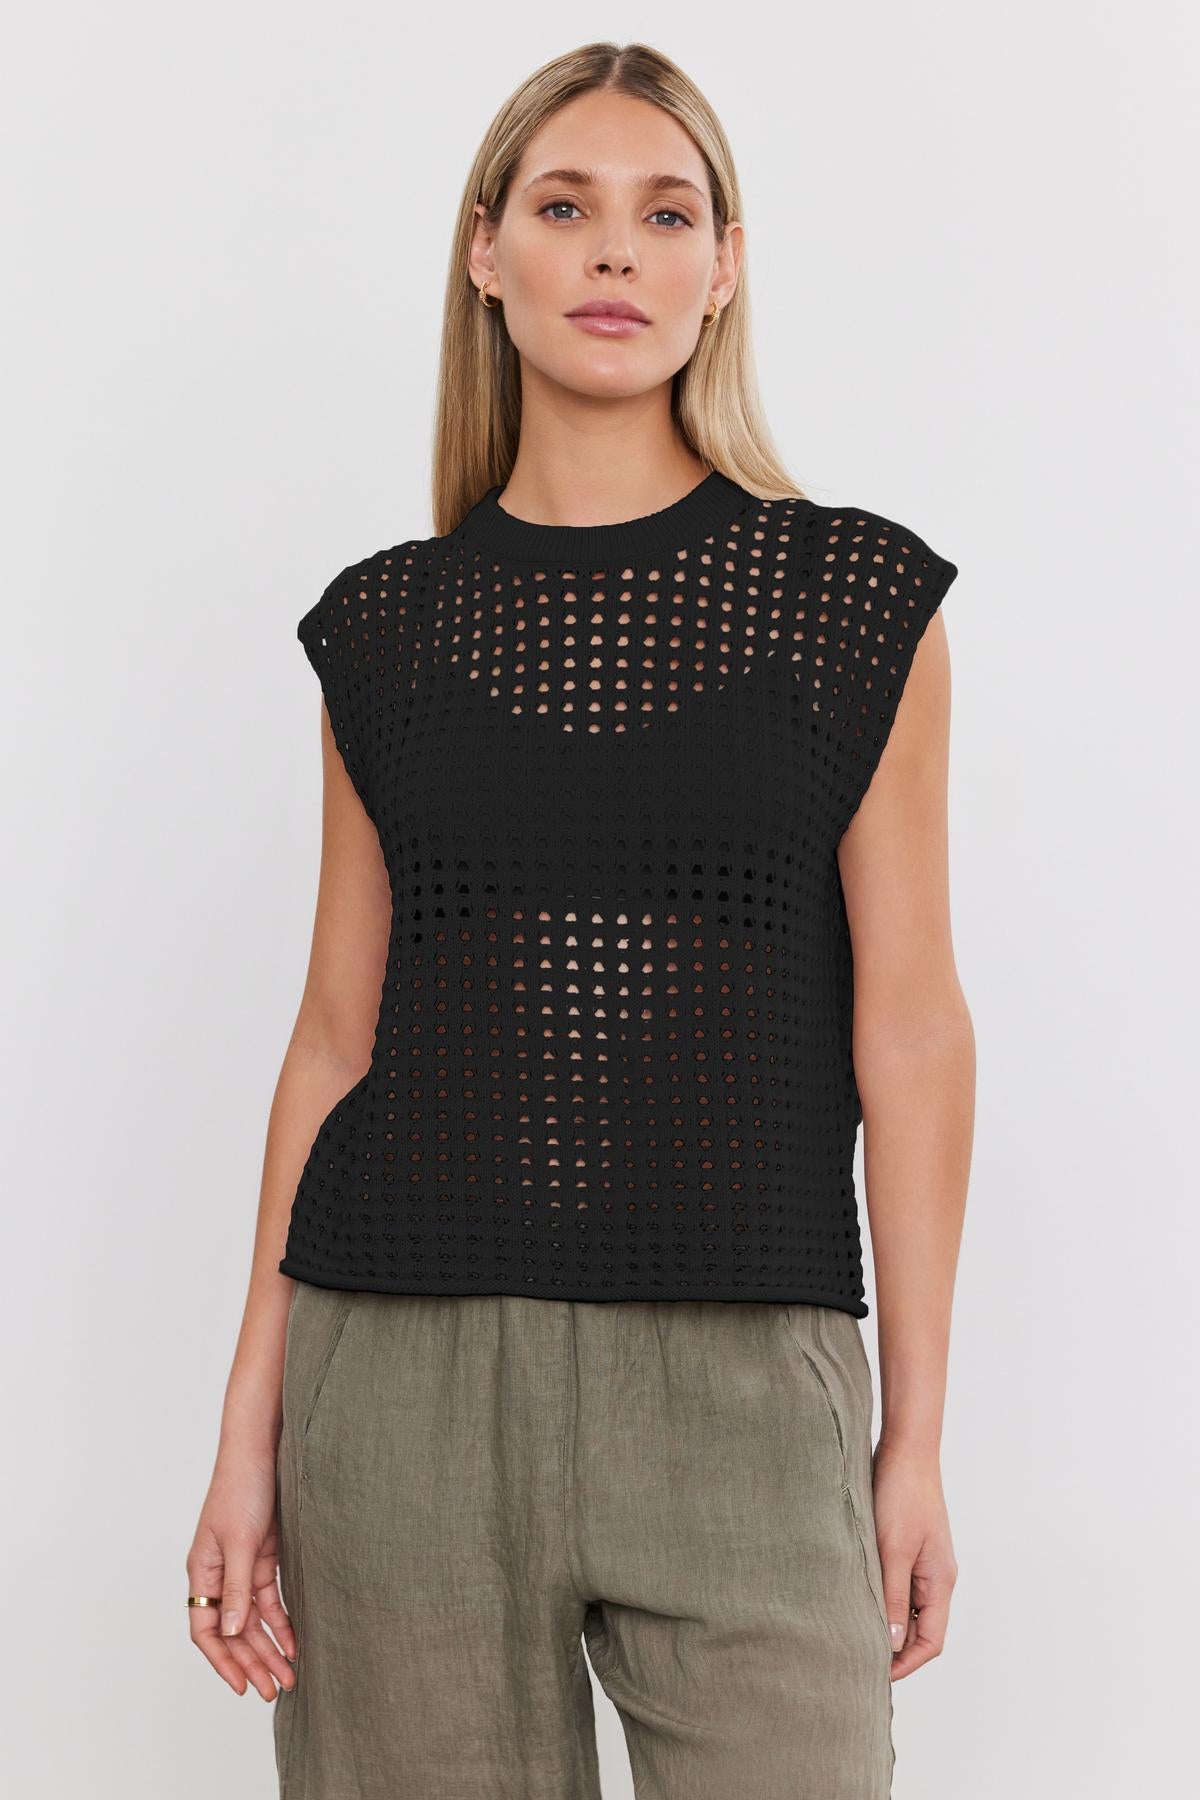 A person with long blonde hair is wearing a black, sleeveless, eyelet knit MAISON SWEATER by Velvet by Graham & Spencer over a black bra, paired with loose-fitting khaki pants. The top features a cropped silhouette perfect for summer. The background is plain white.-37054537859265